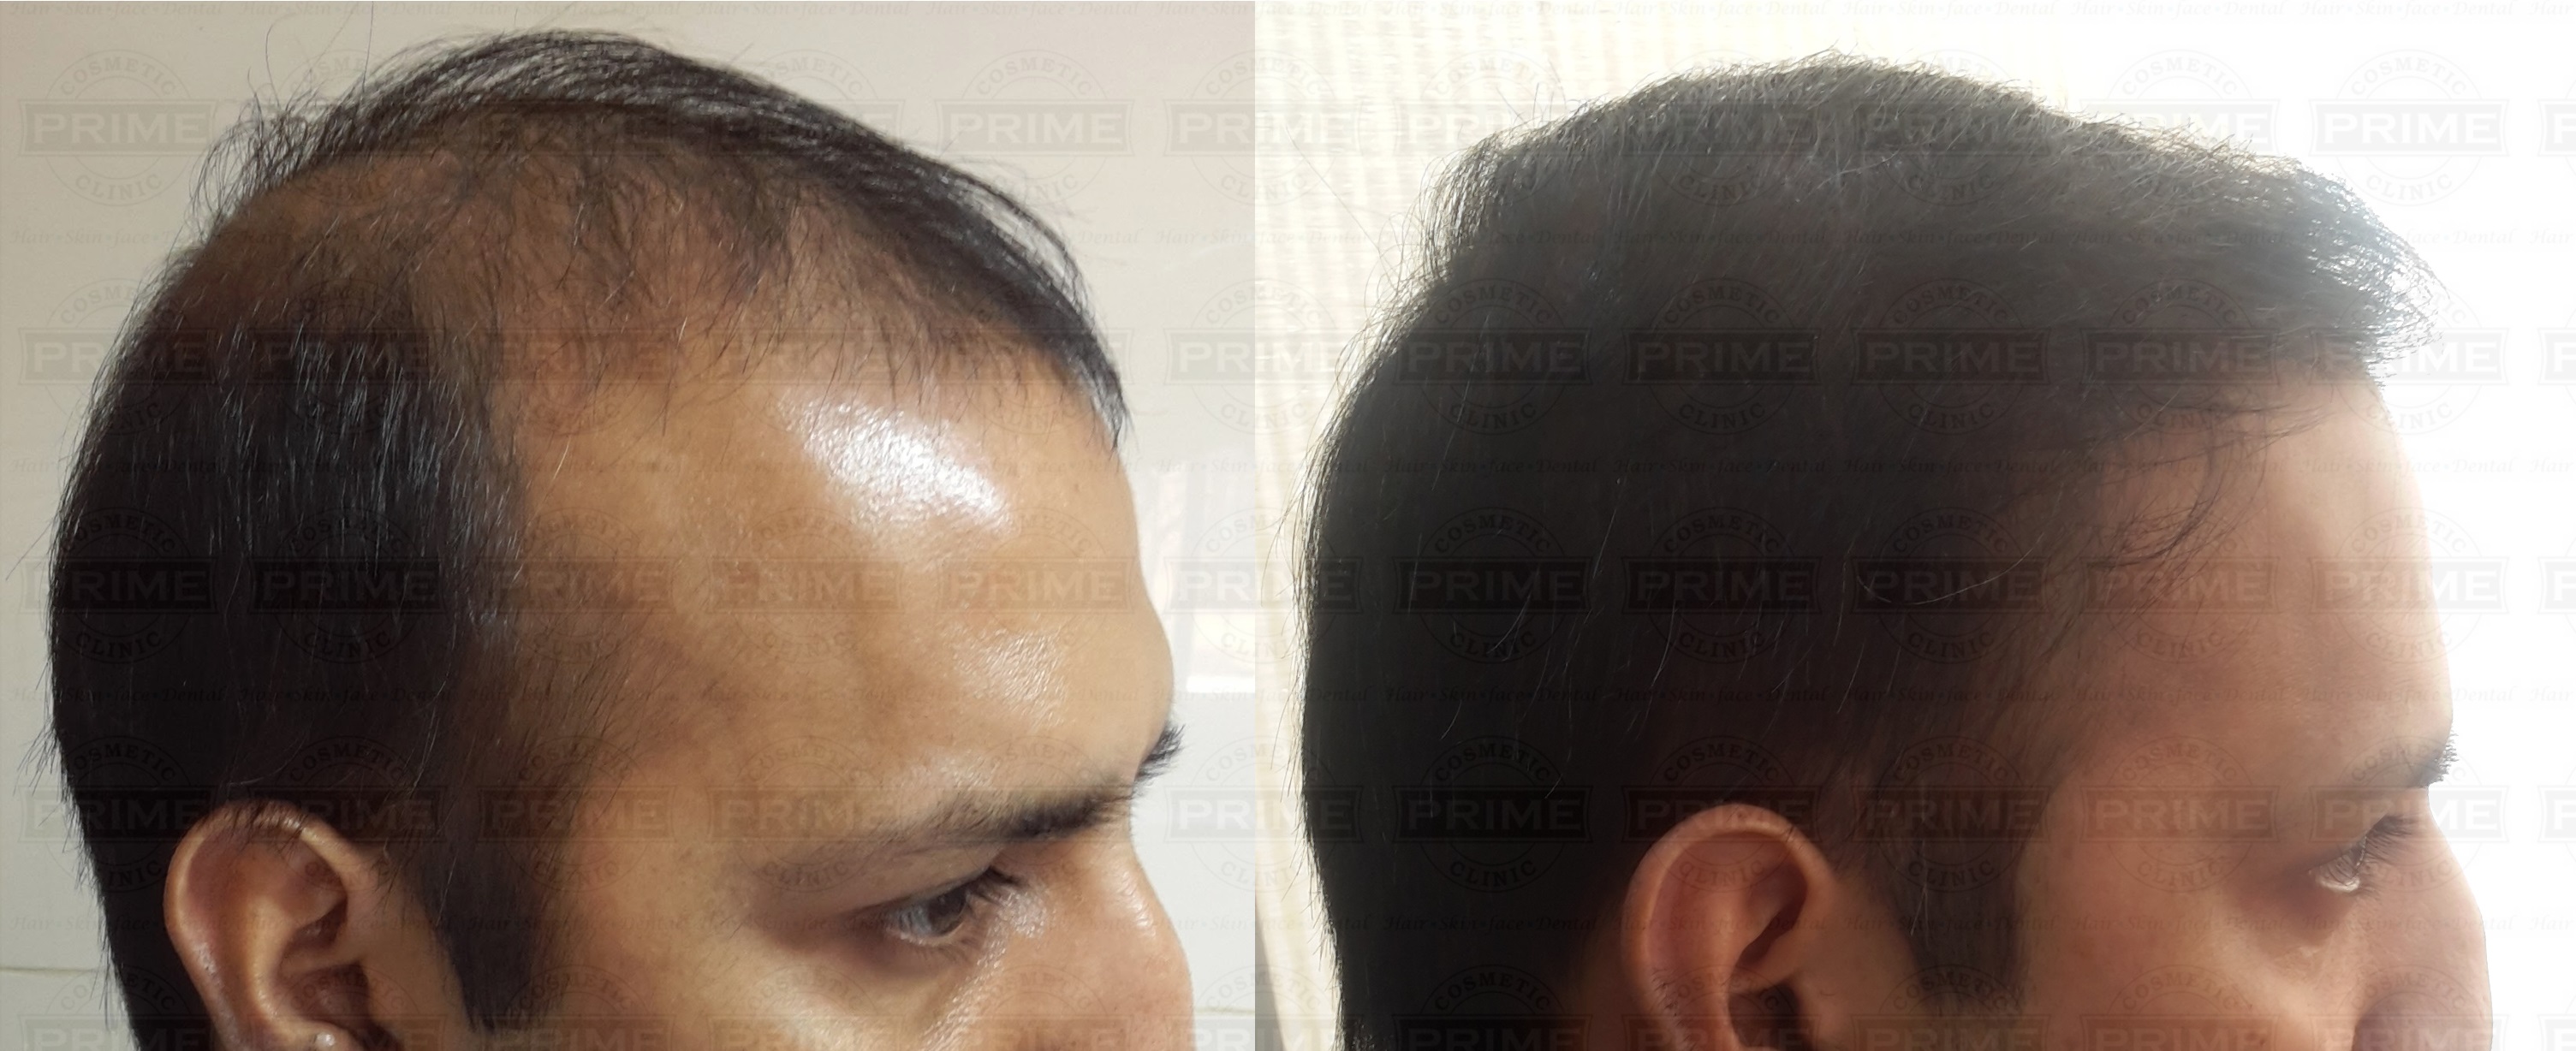 Biofibre Hair Implant Before and After - Prime Hair Studio & Cosmetic Clinic